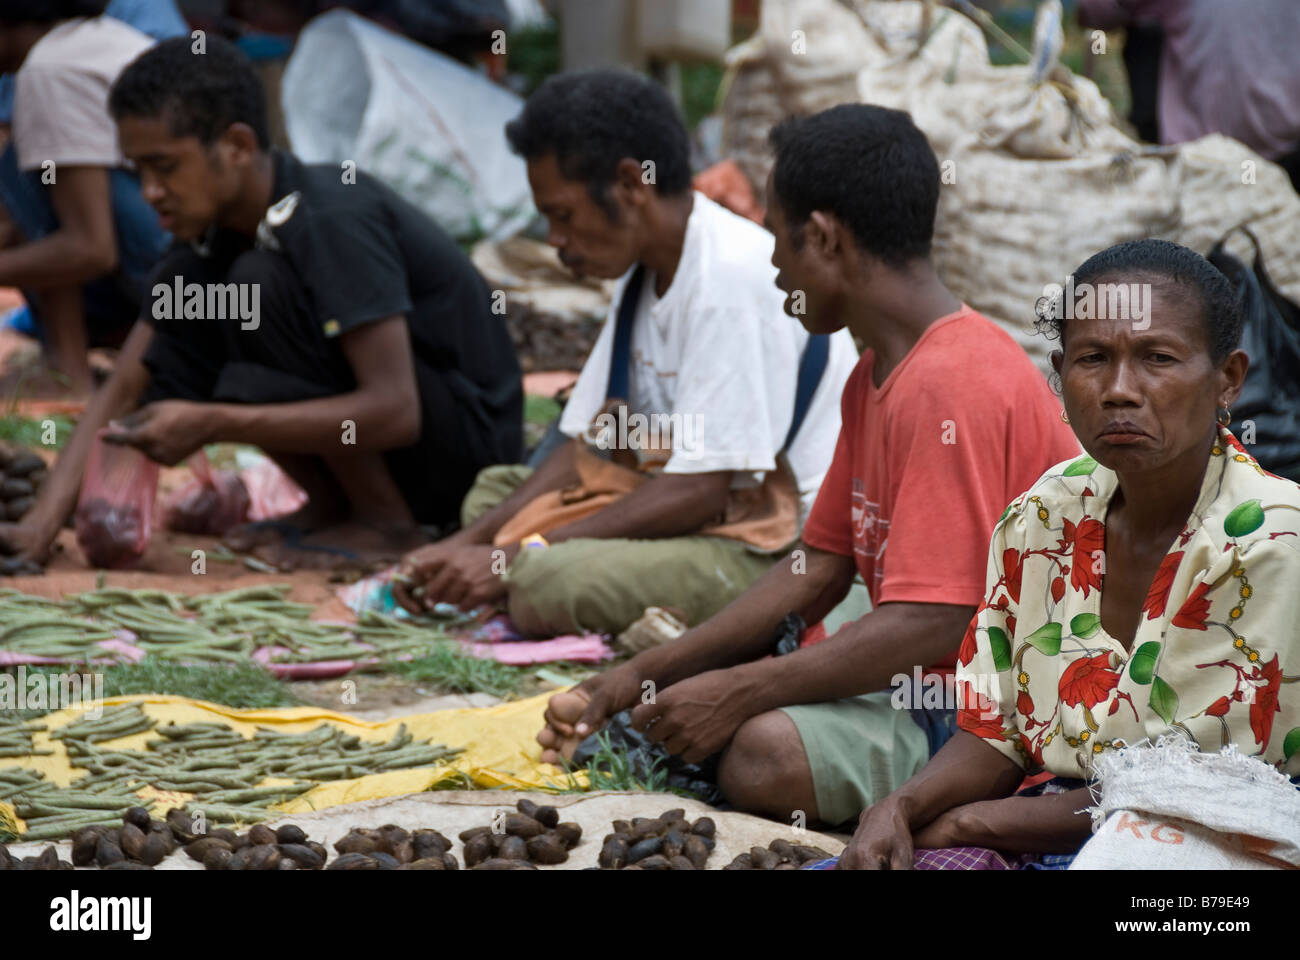 Vendors sit in Kapan market with one of them looking disapproving, West Timor, Indonesia Stock Photo